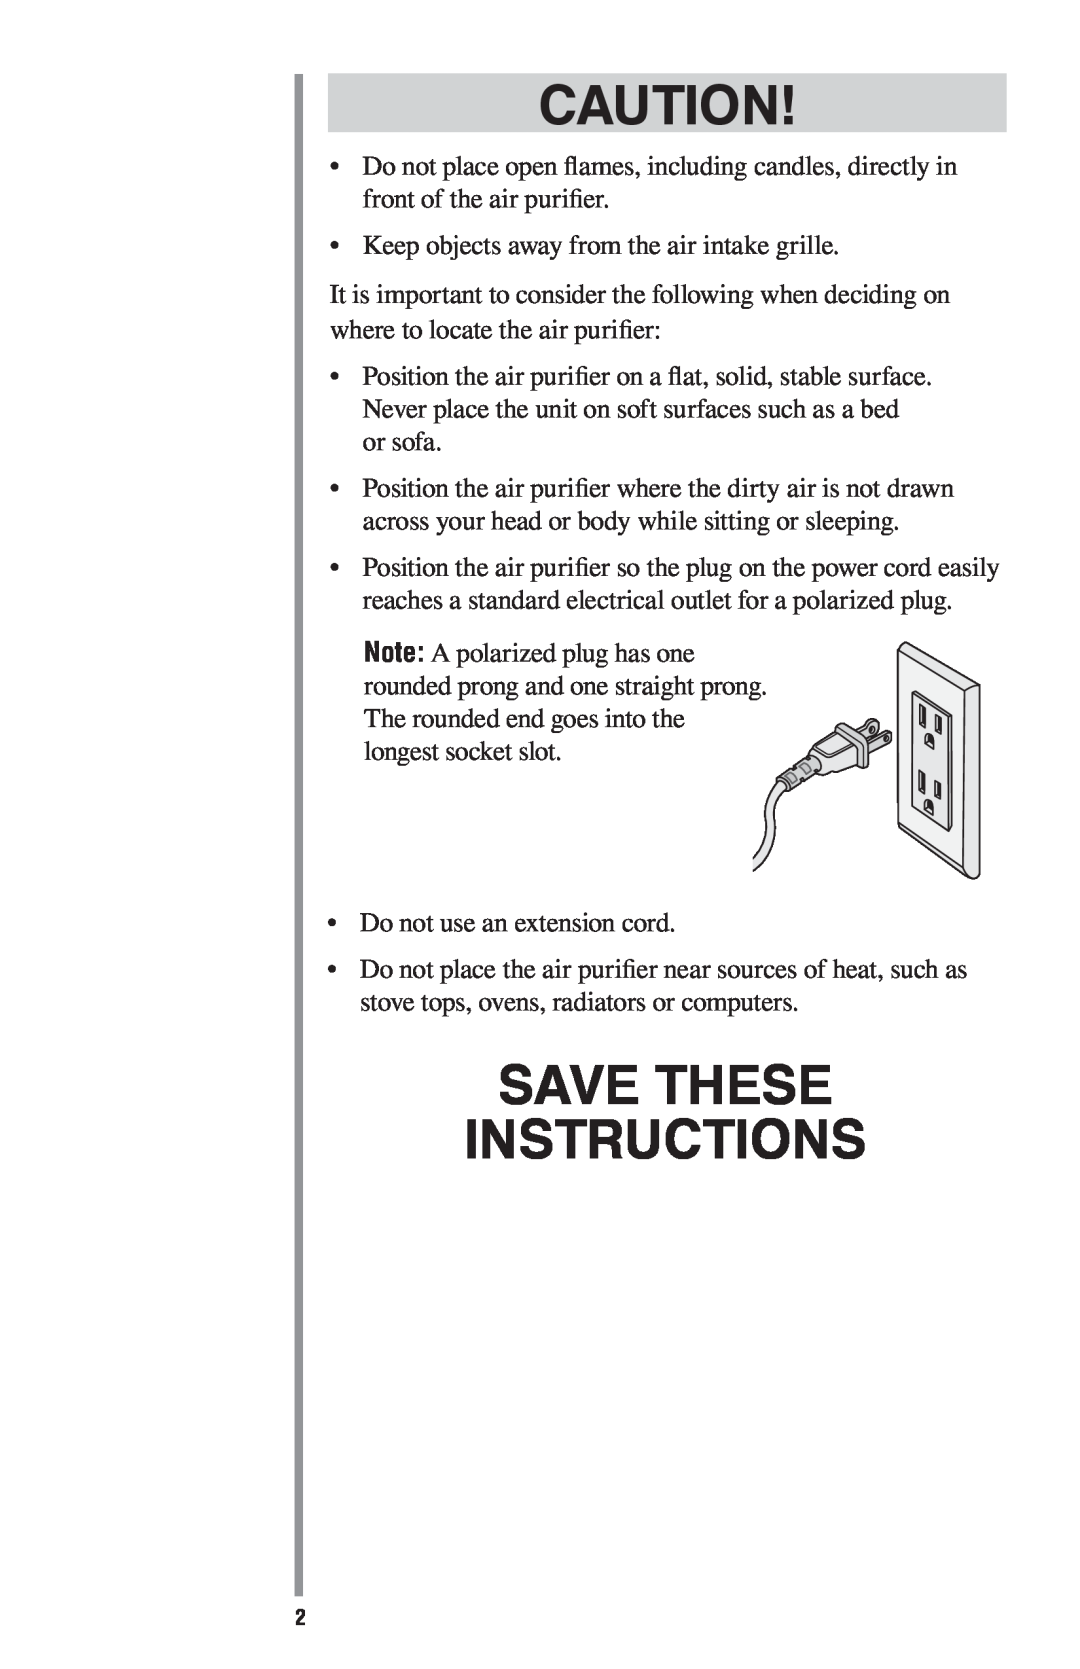 Oreck ProShield Air Purifier manual Save These Instructions 